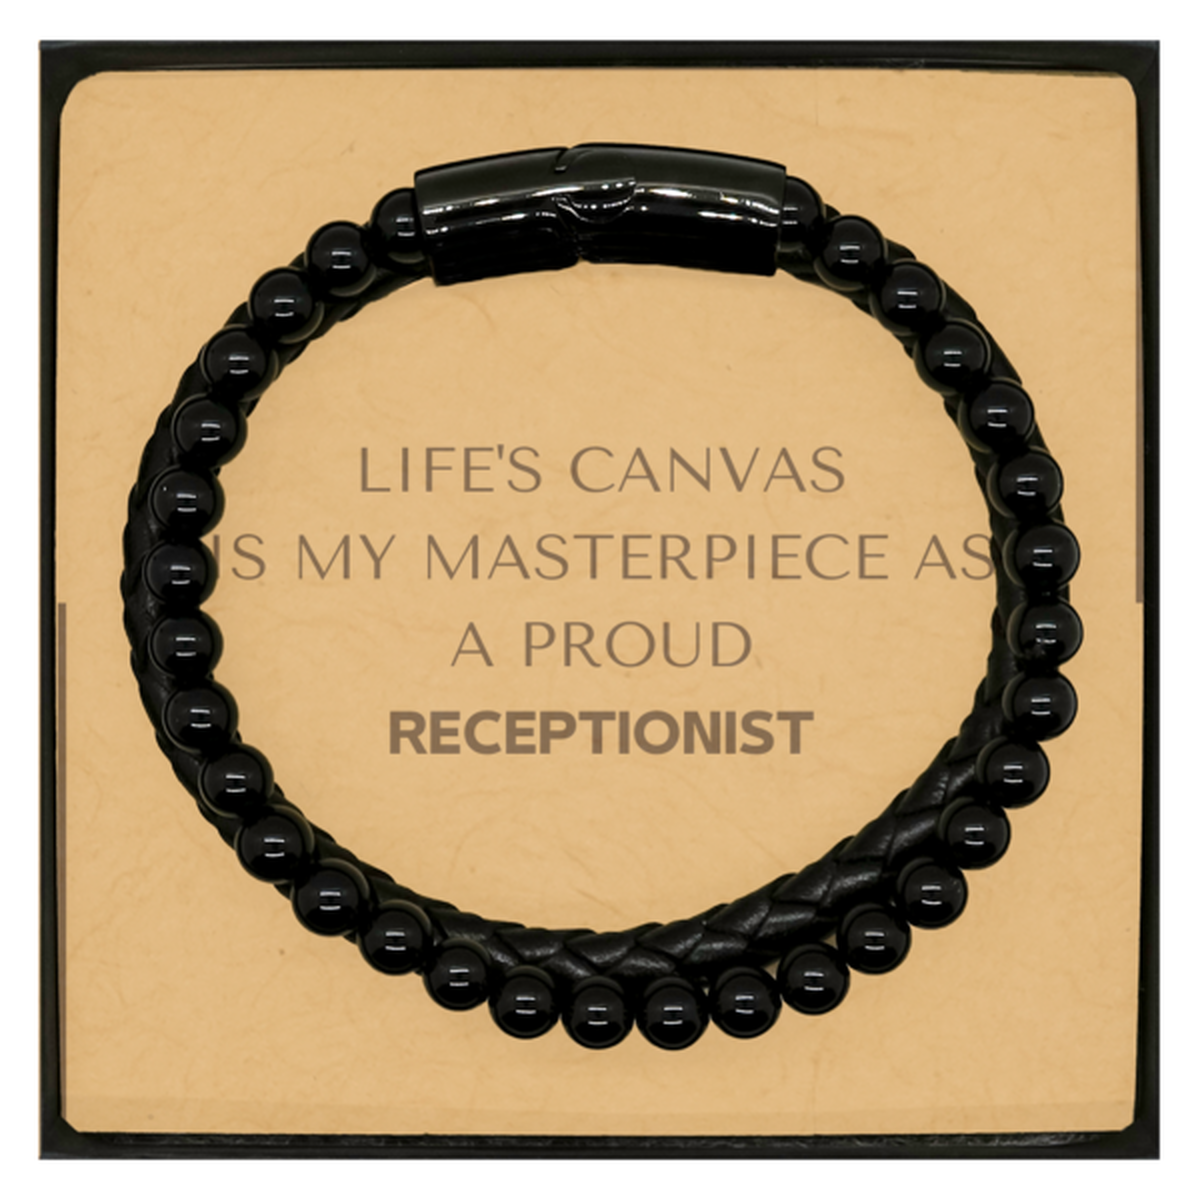 Proud Receptionist Gifts, Life's canvas is my masterpiece, Epic Birthday Christmas Unique Stone Leather Bracelets For Receptionist, Coworkers, Men, Women, Friends